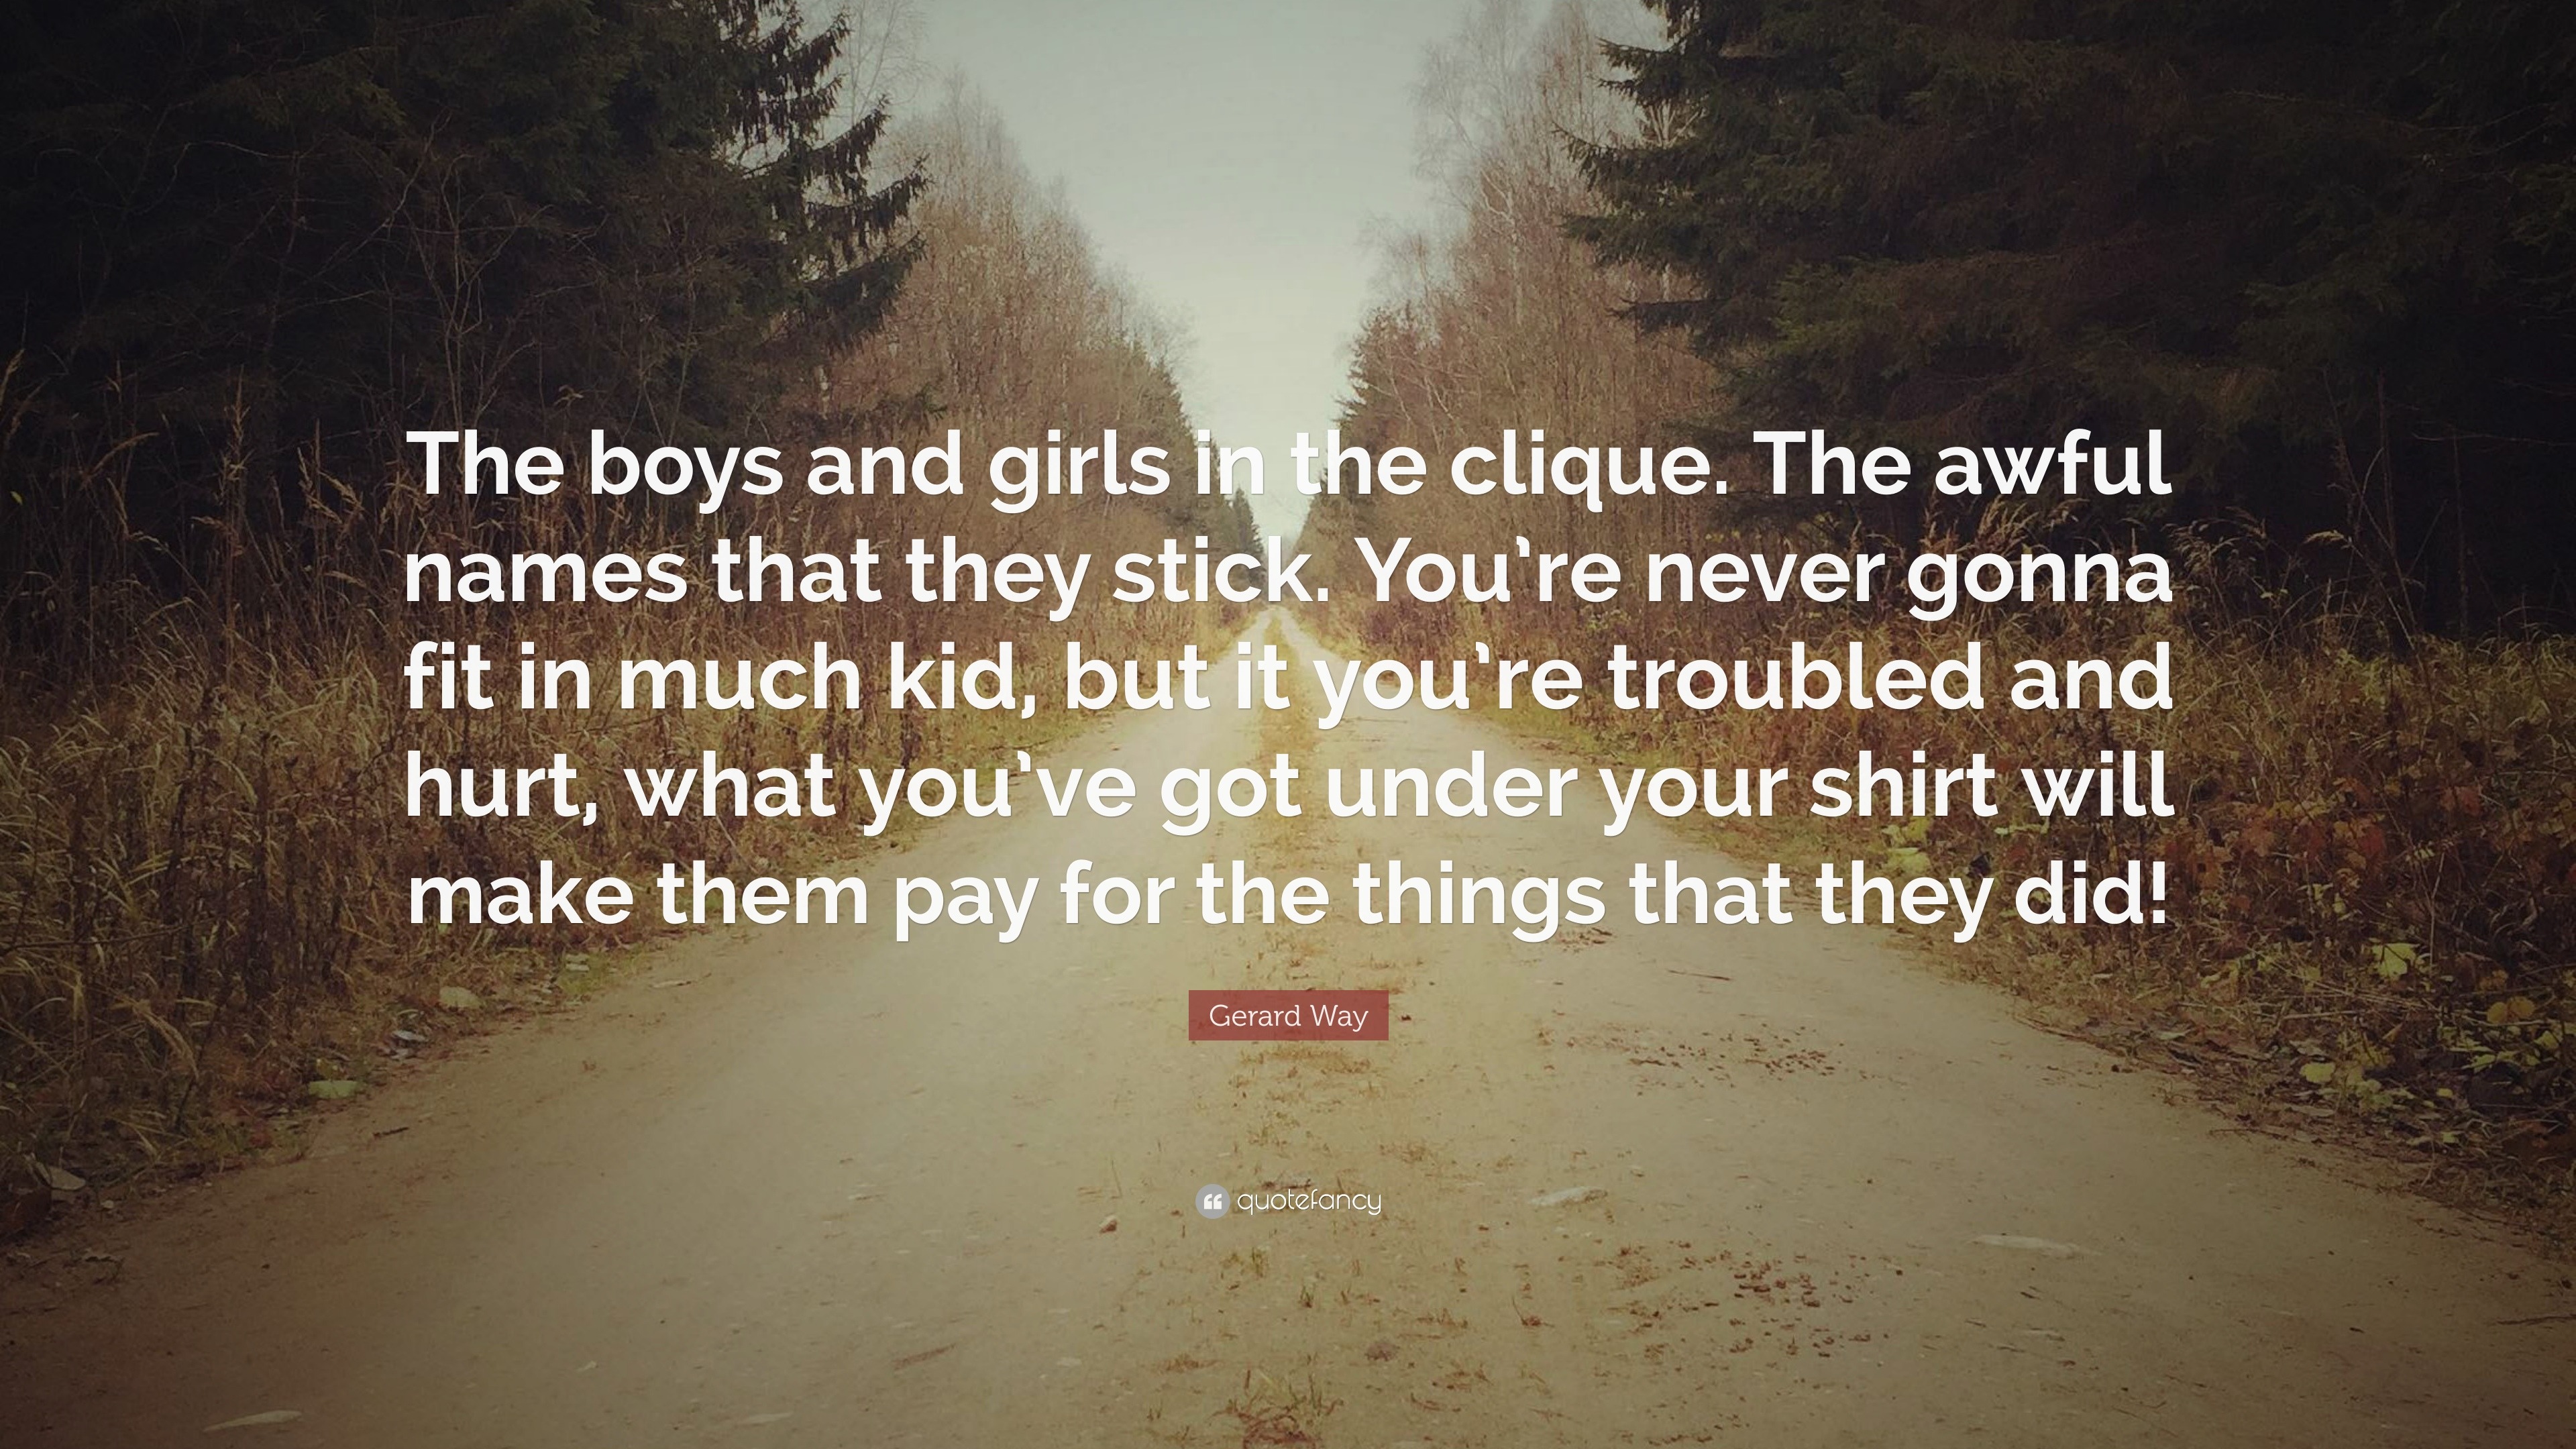 quotes about boys hurting girls